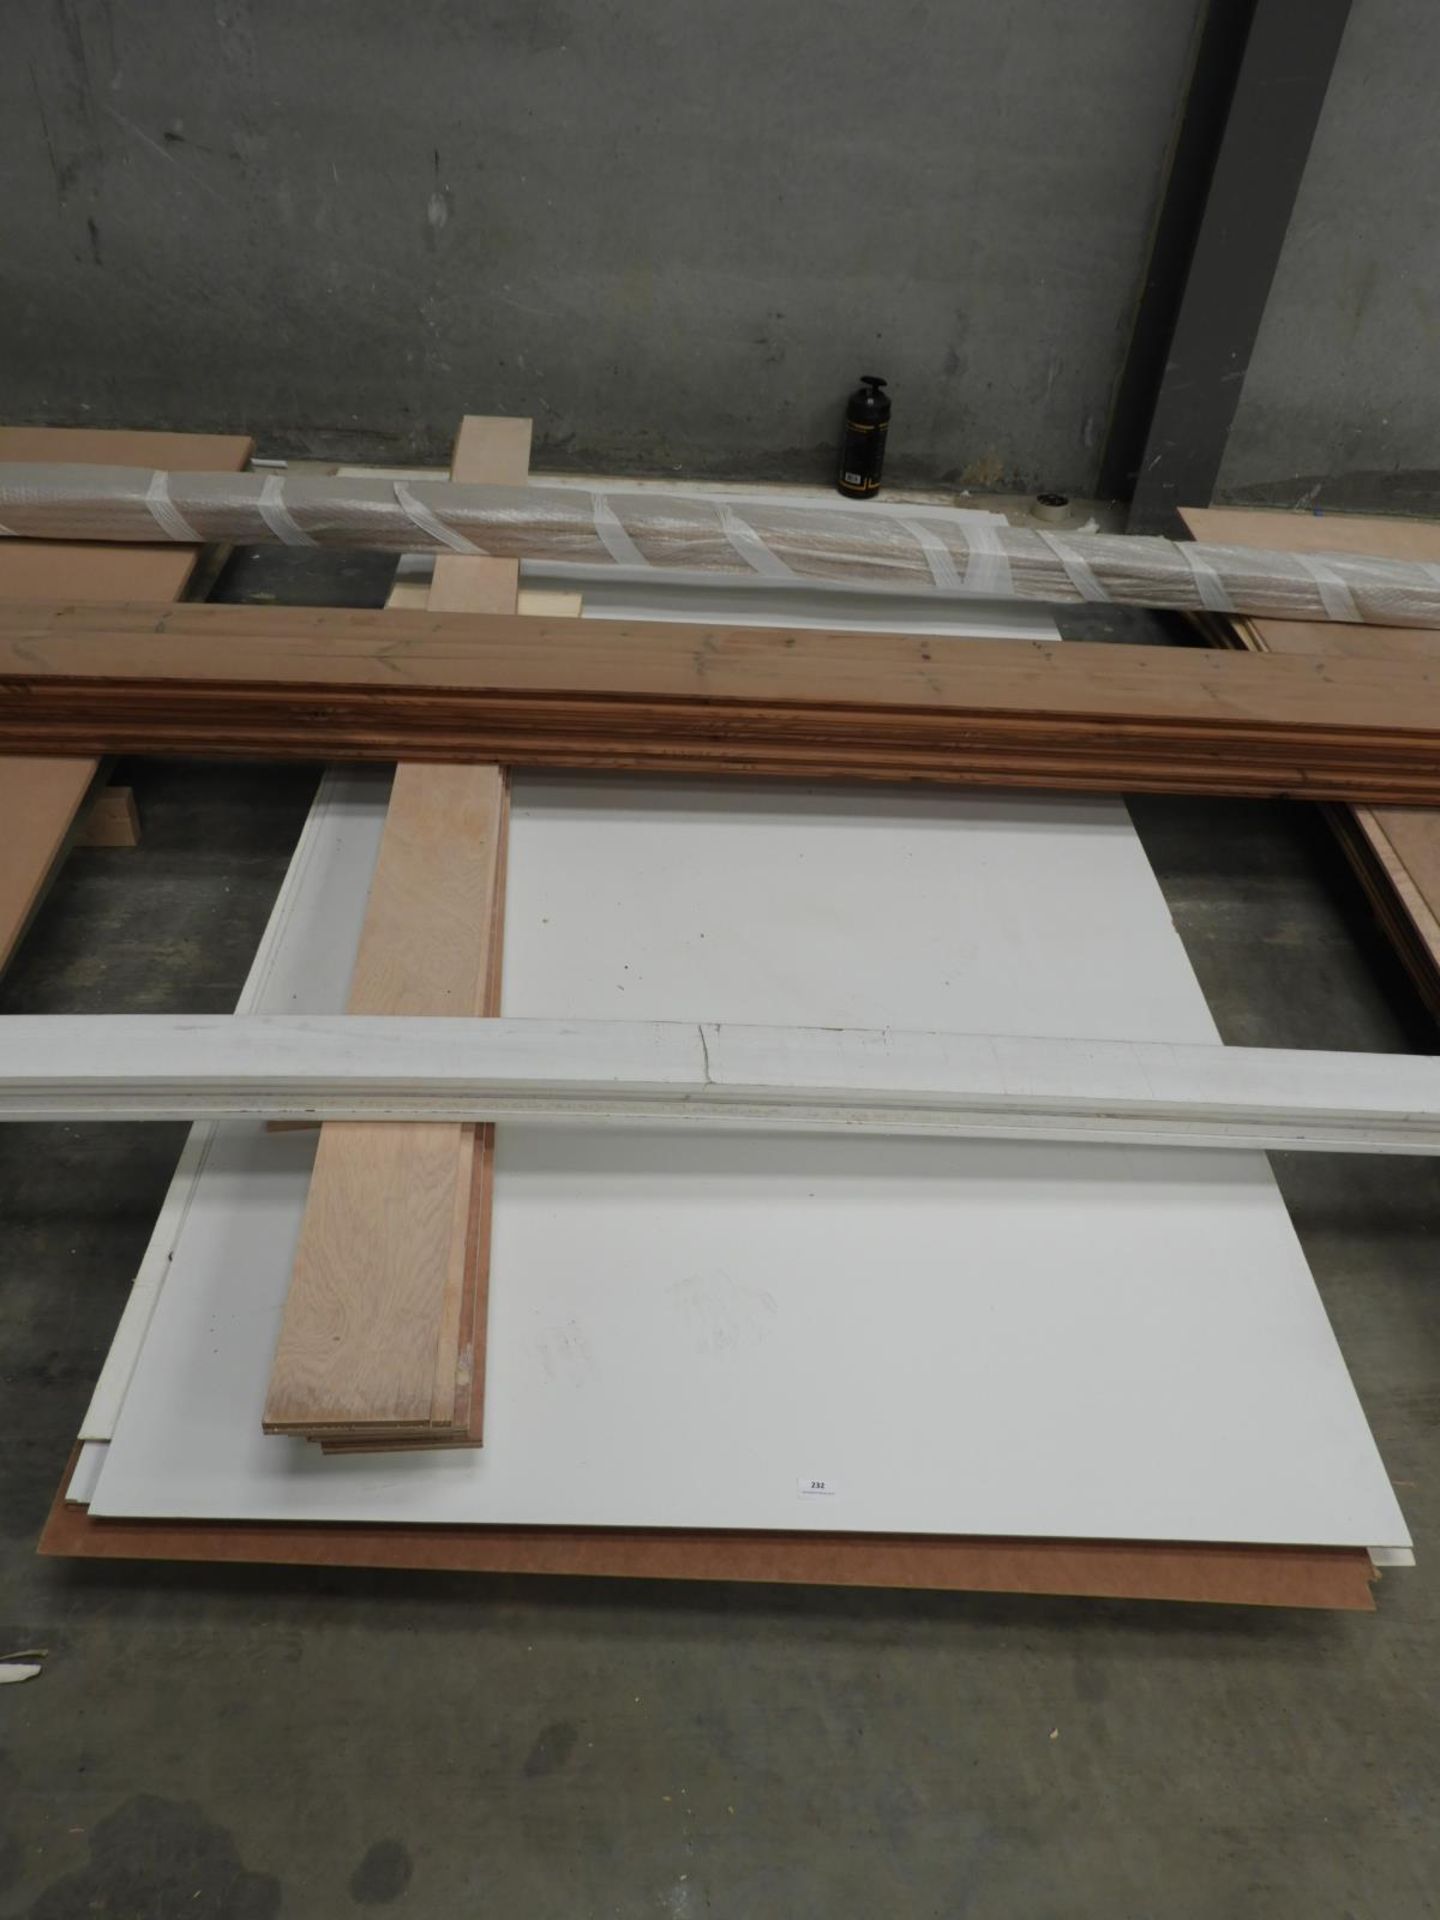 *Twelve Sheets of Faced Plywood, Hardboard, and Other Sheet Material